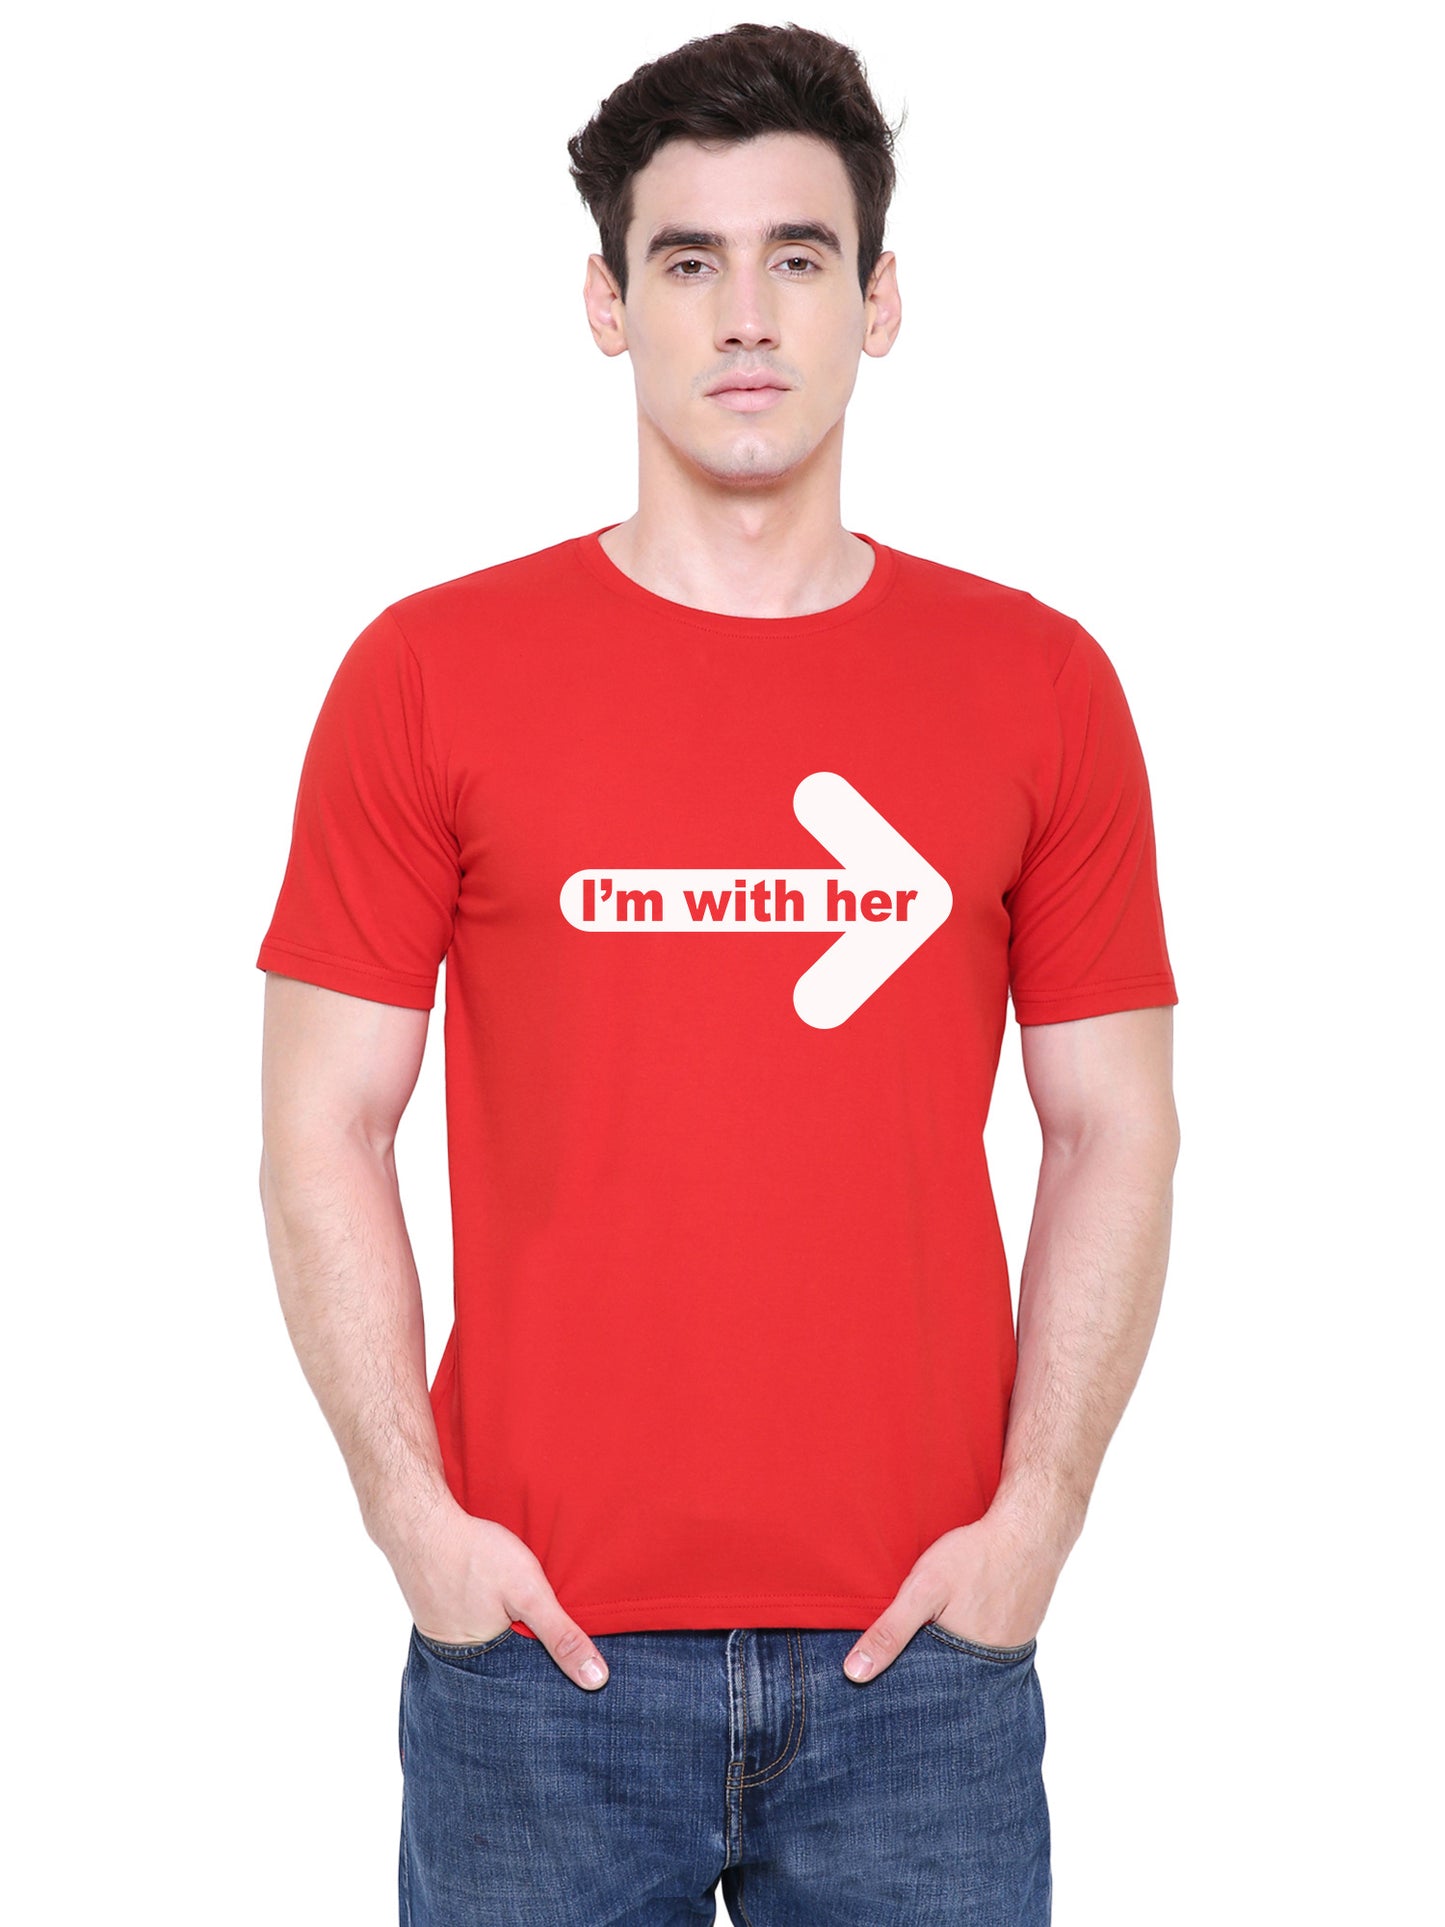 With him & her matching Couple T shirts- Red